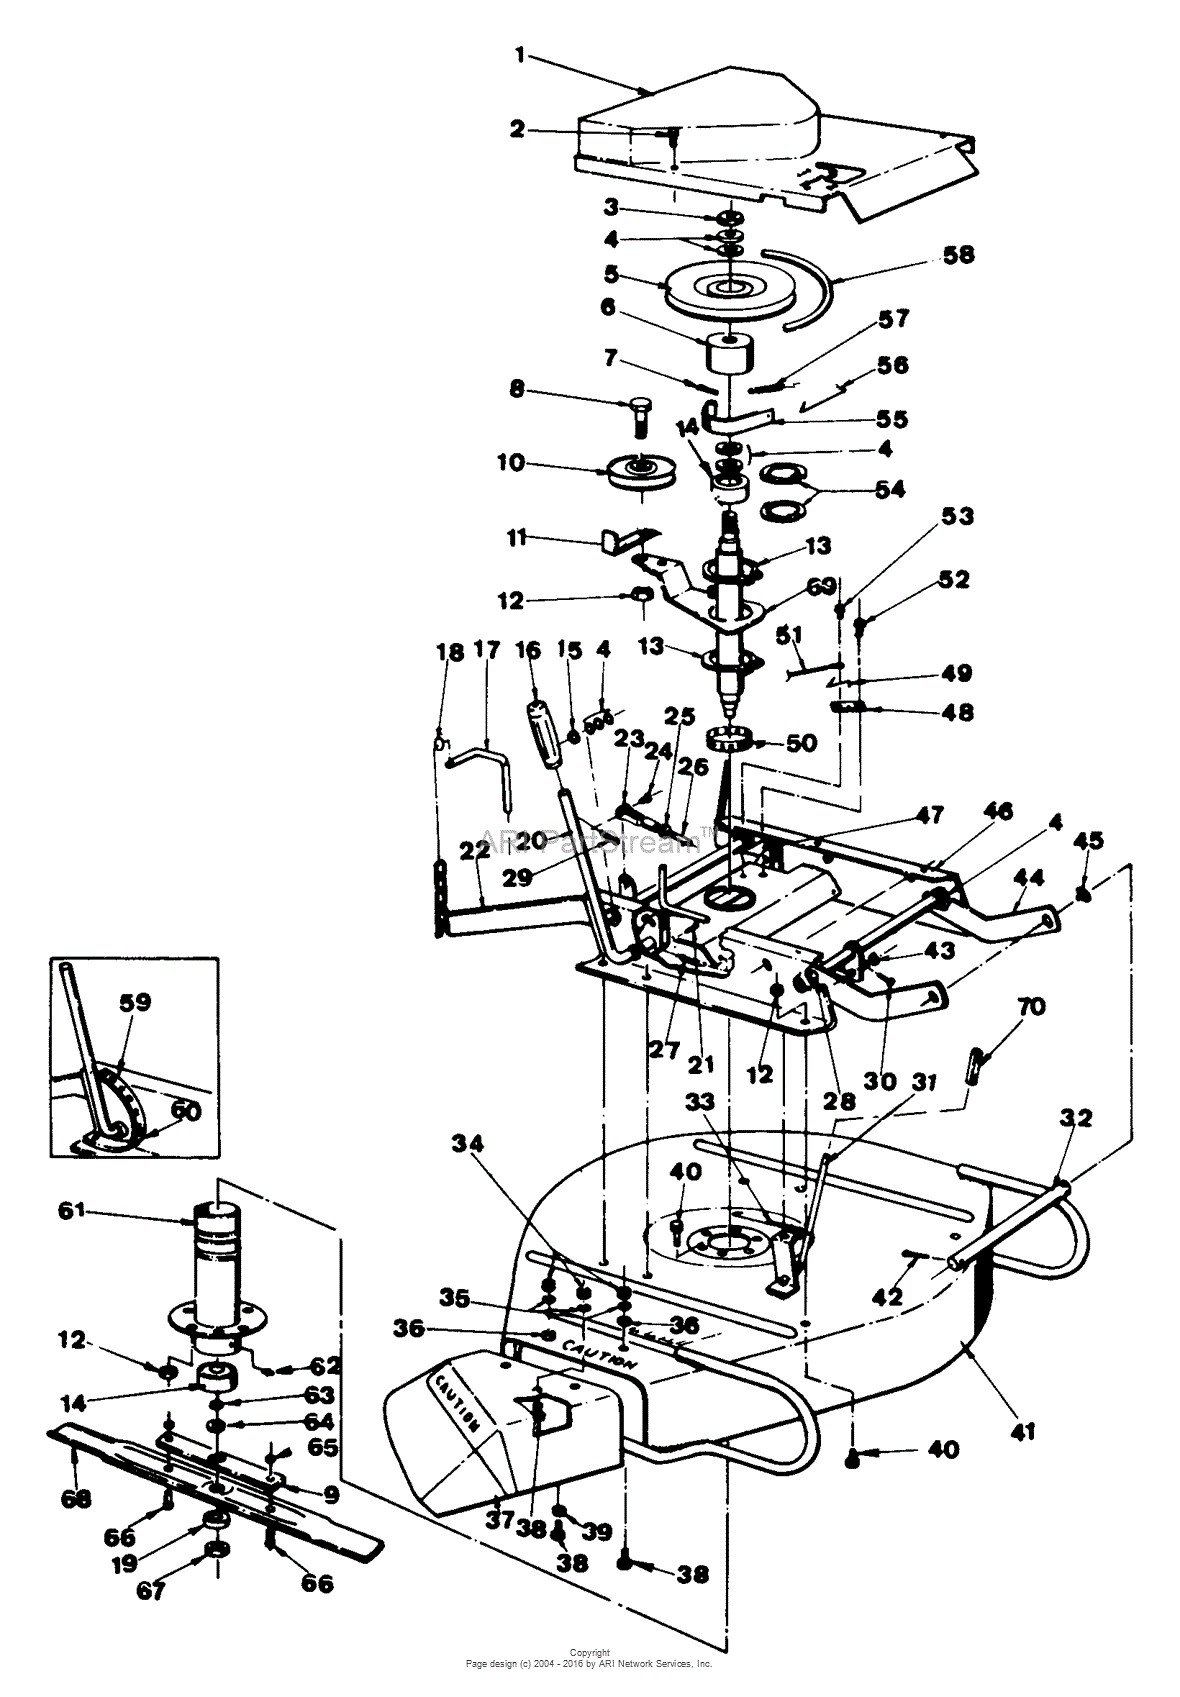 Briggs and Stratton Engine Parts Diagram Snapper 2680 26" 8 Hp Rear Engine Rider Series 0 Parts Diagram for Of Briggs and Stratton Engine Parts Diagram